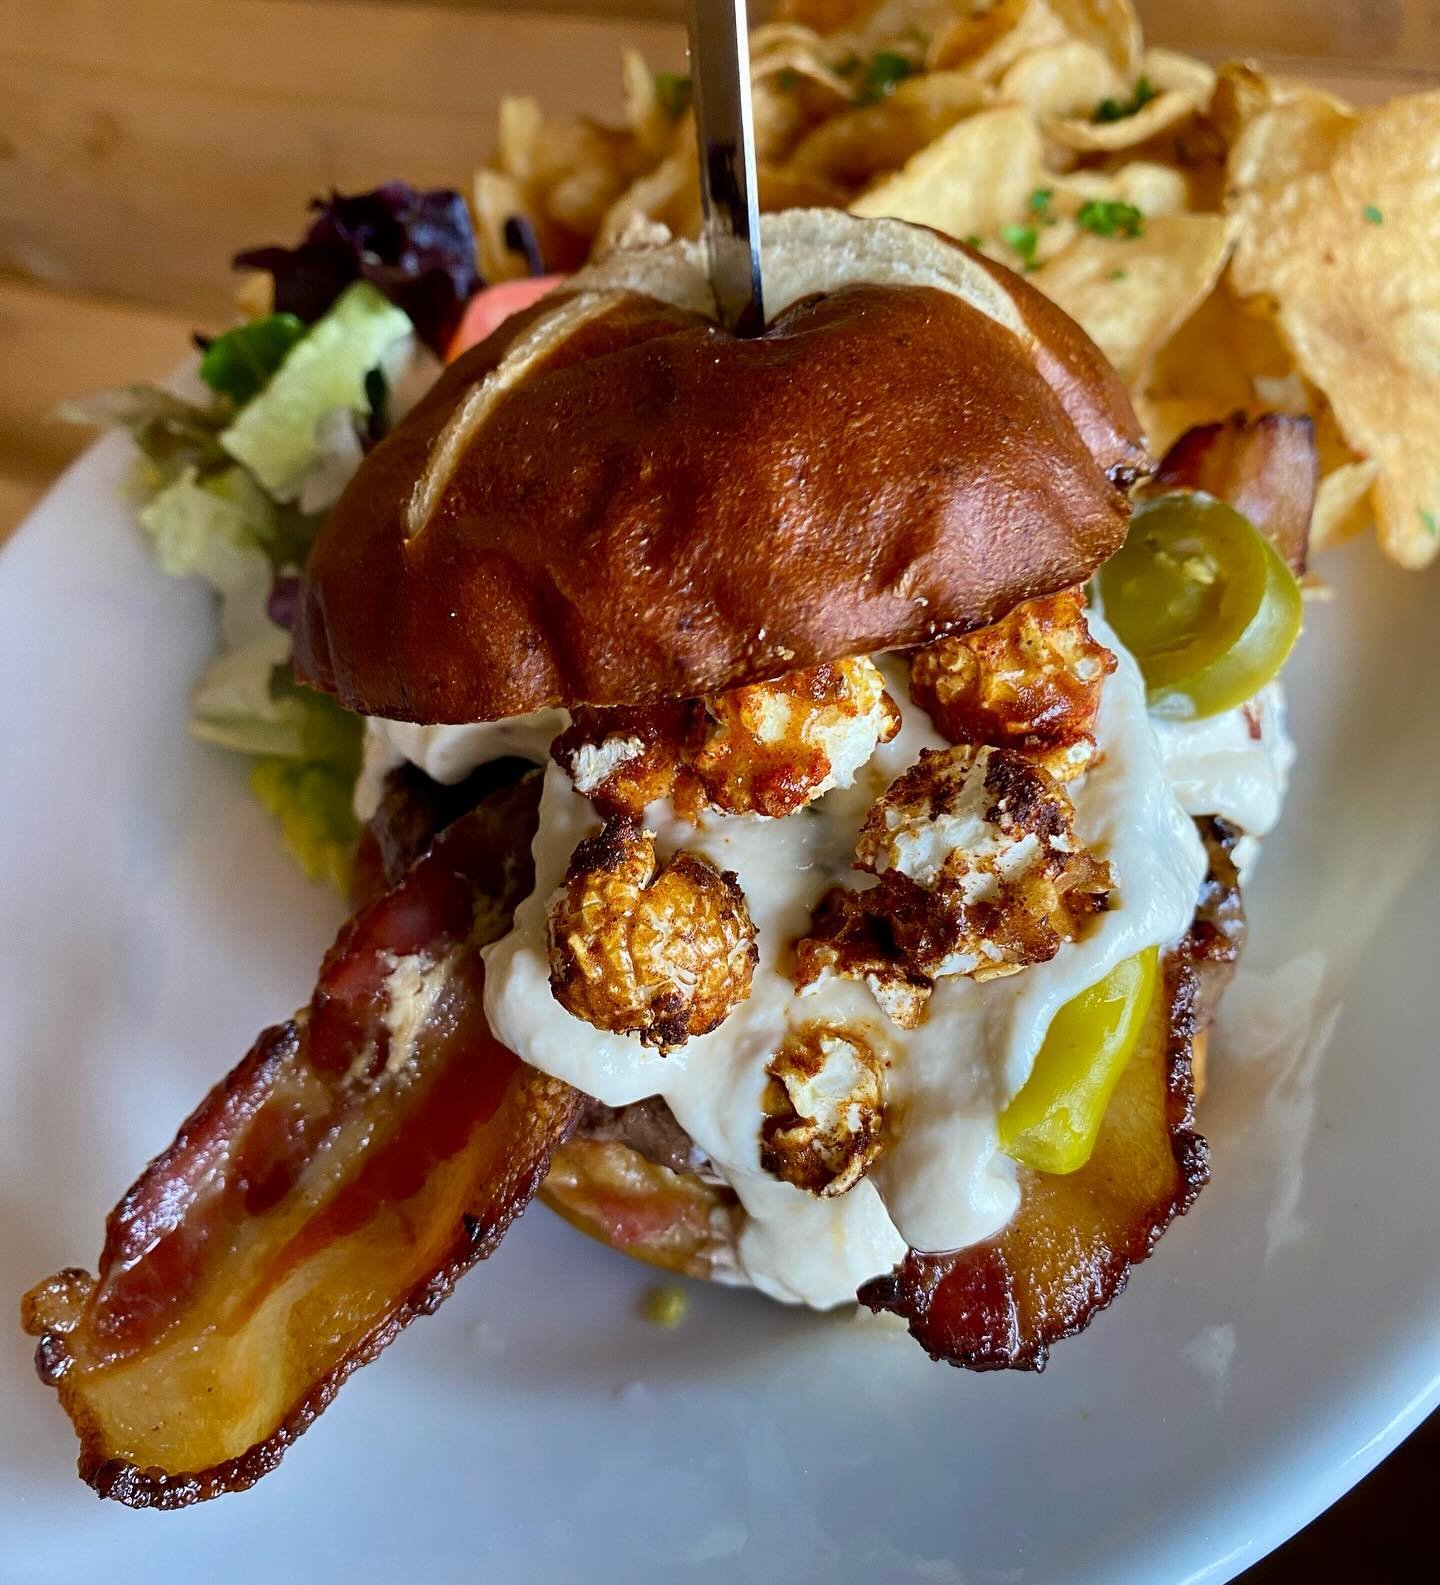 Denver on Kipling Burger of the Month - Take Me Out to The Ballpark Burger! Our signature elk-beef blend patty on a toasted pretzel bun with PBR beer cheese, bacon, pickled jalape&ntilde;os &amp; sport peppers, &amp; spiced Cracker Jacks! 
Only avail